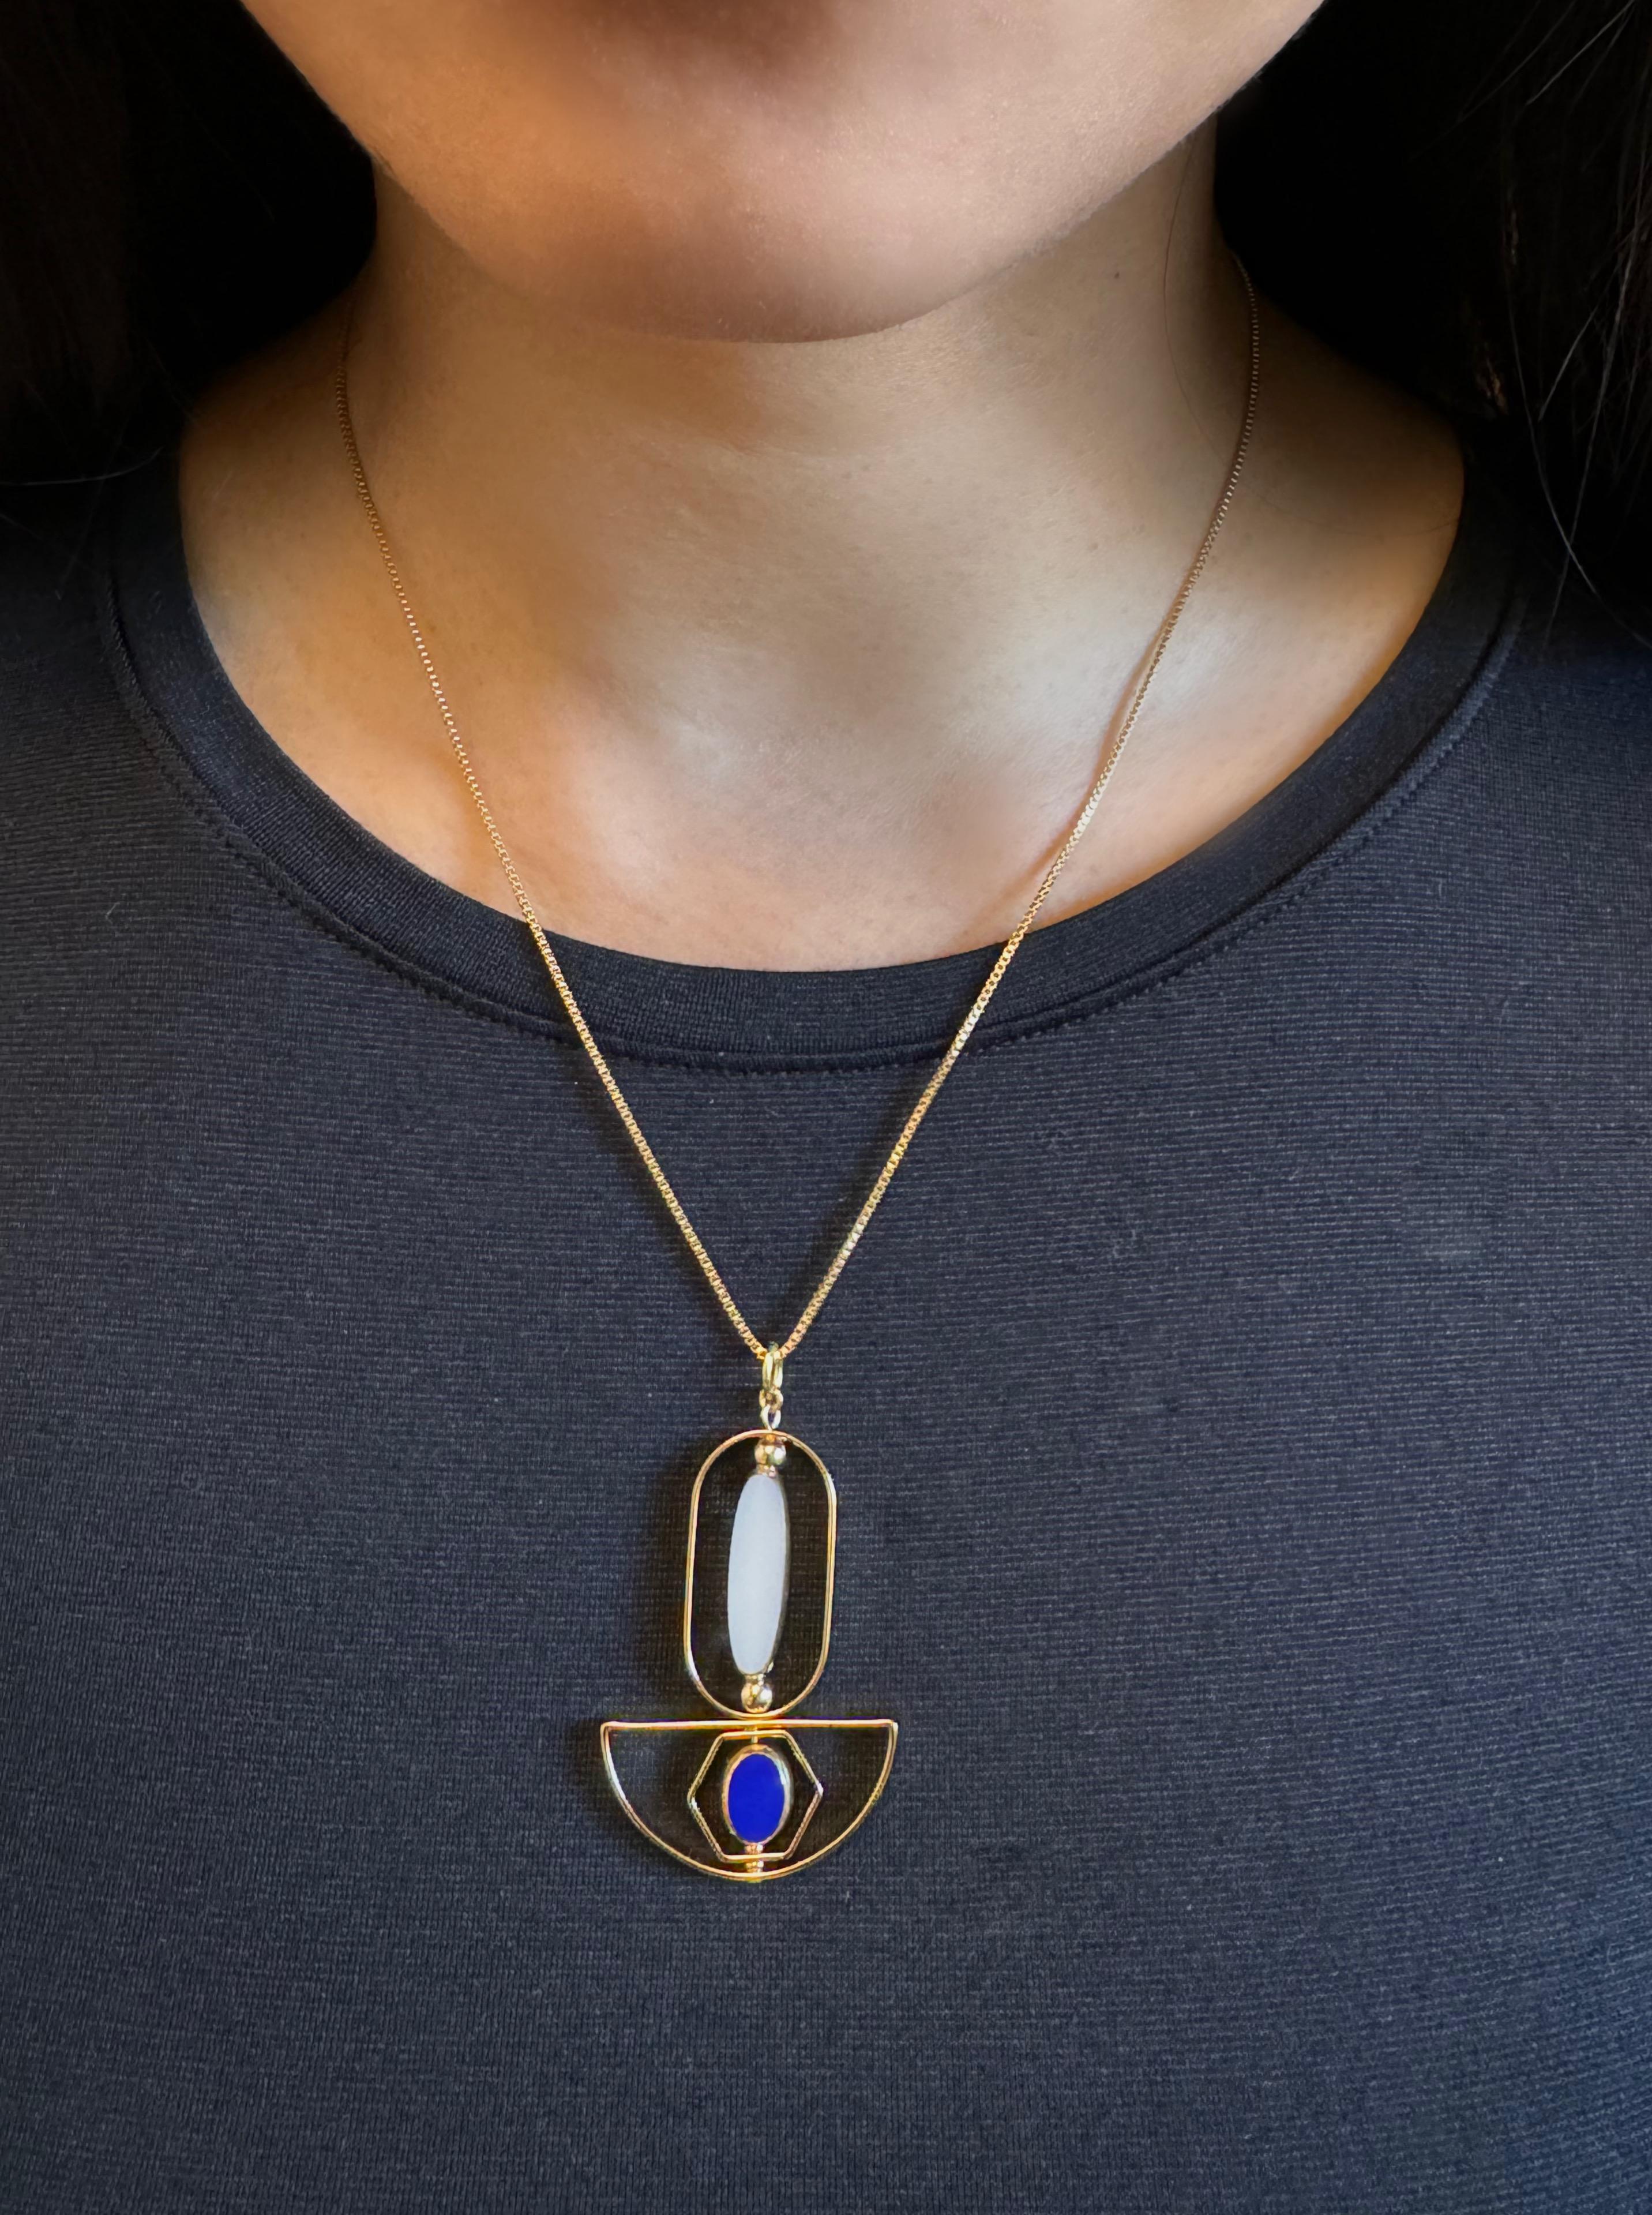 The pendant consist of white long oval and small blue oval new old stock vintage German glass beads that are framed with 24K gold. The beads were hand-pressed during the 1920s-1960s. No two beads are exactly alike. These beads are no longer in